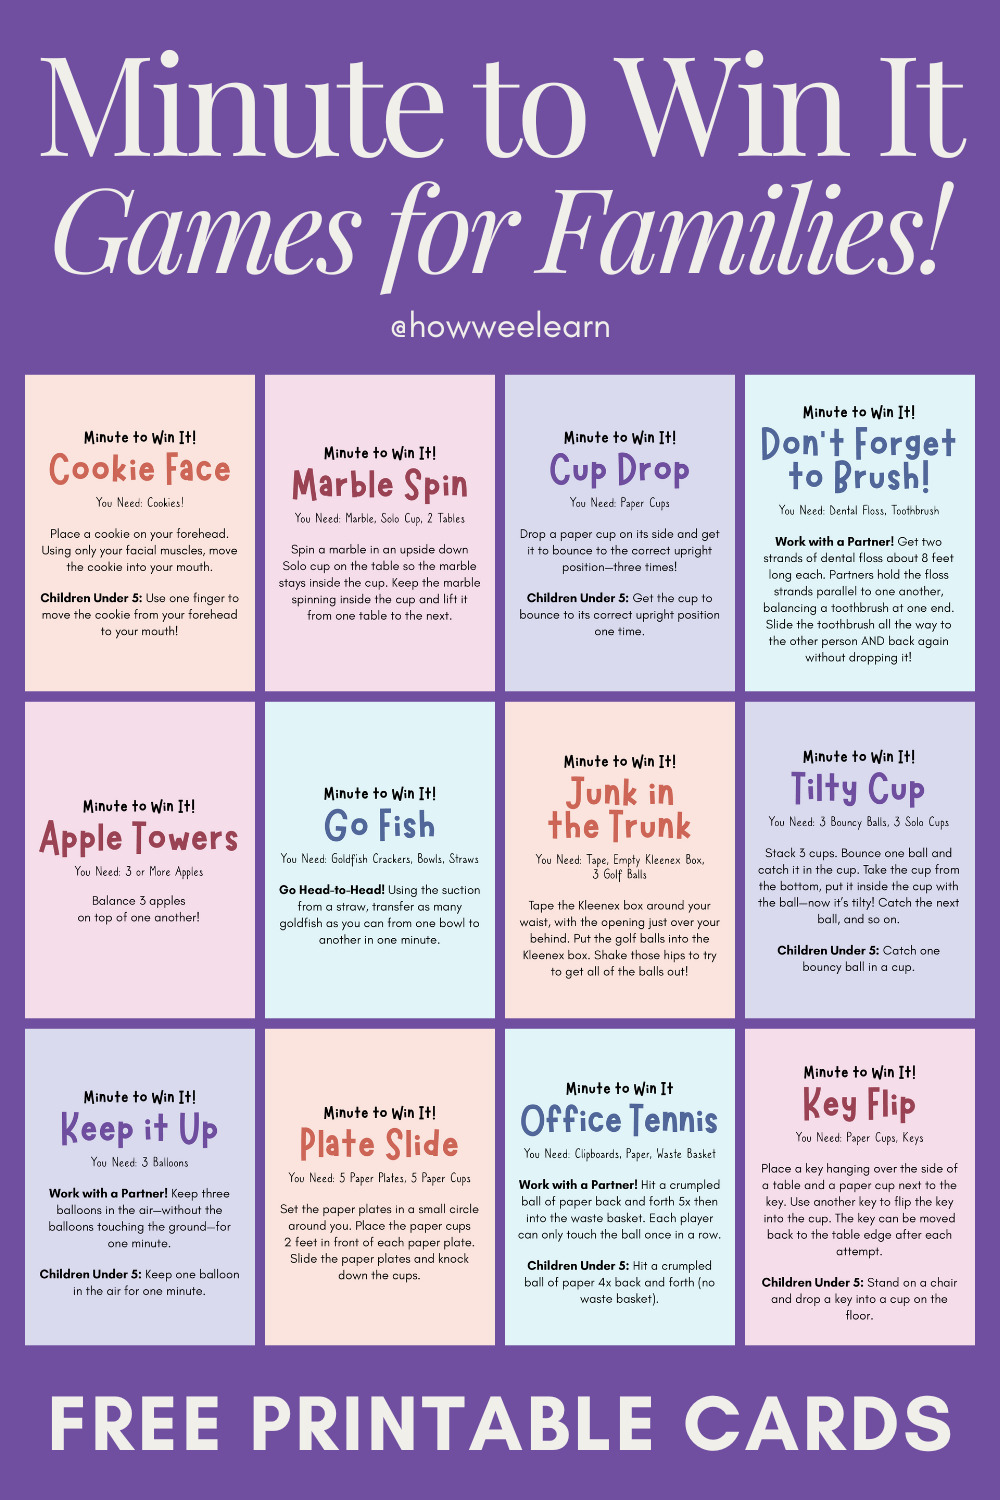 Minute to Win It Games with Free Printable Cards